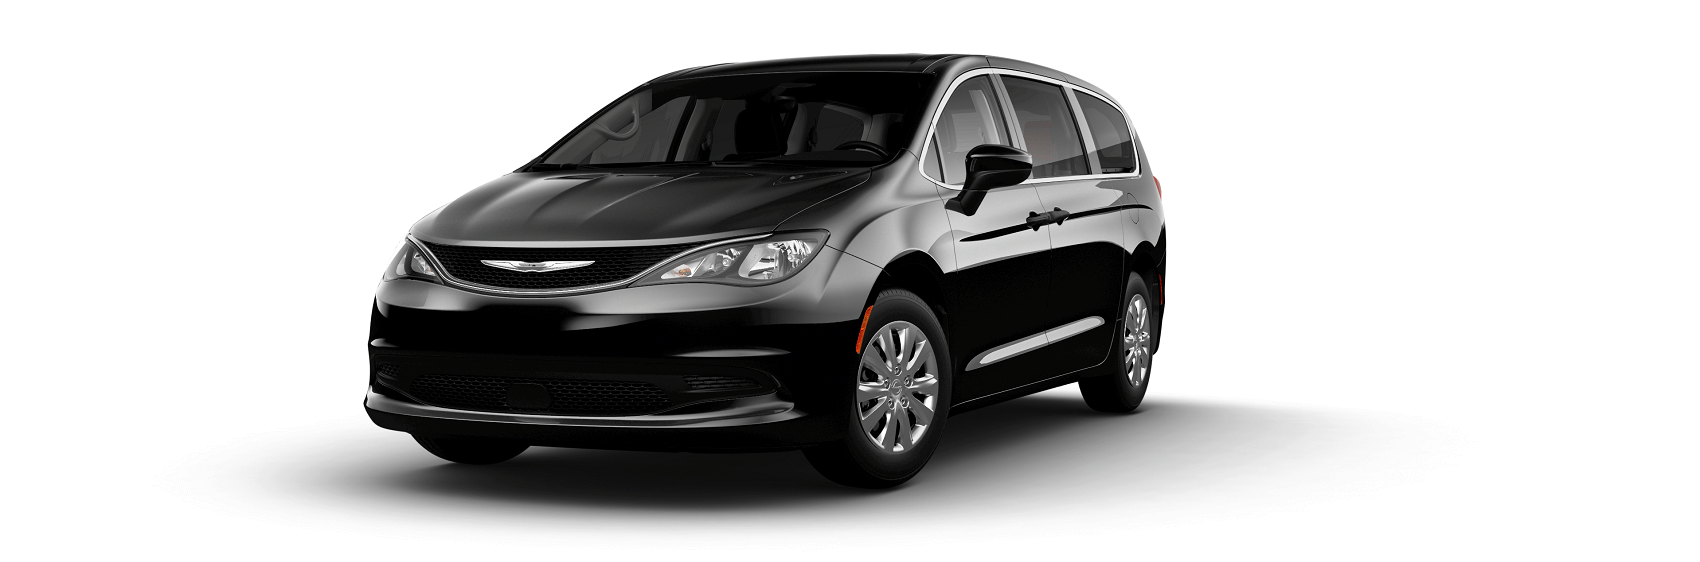 2021 Chrysler Voyager Review